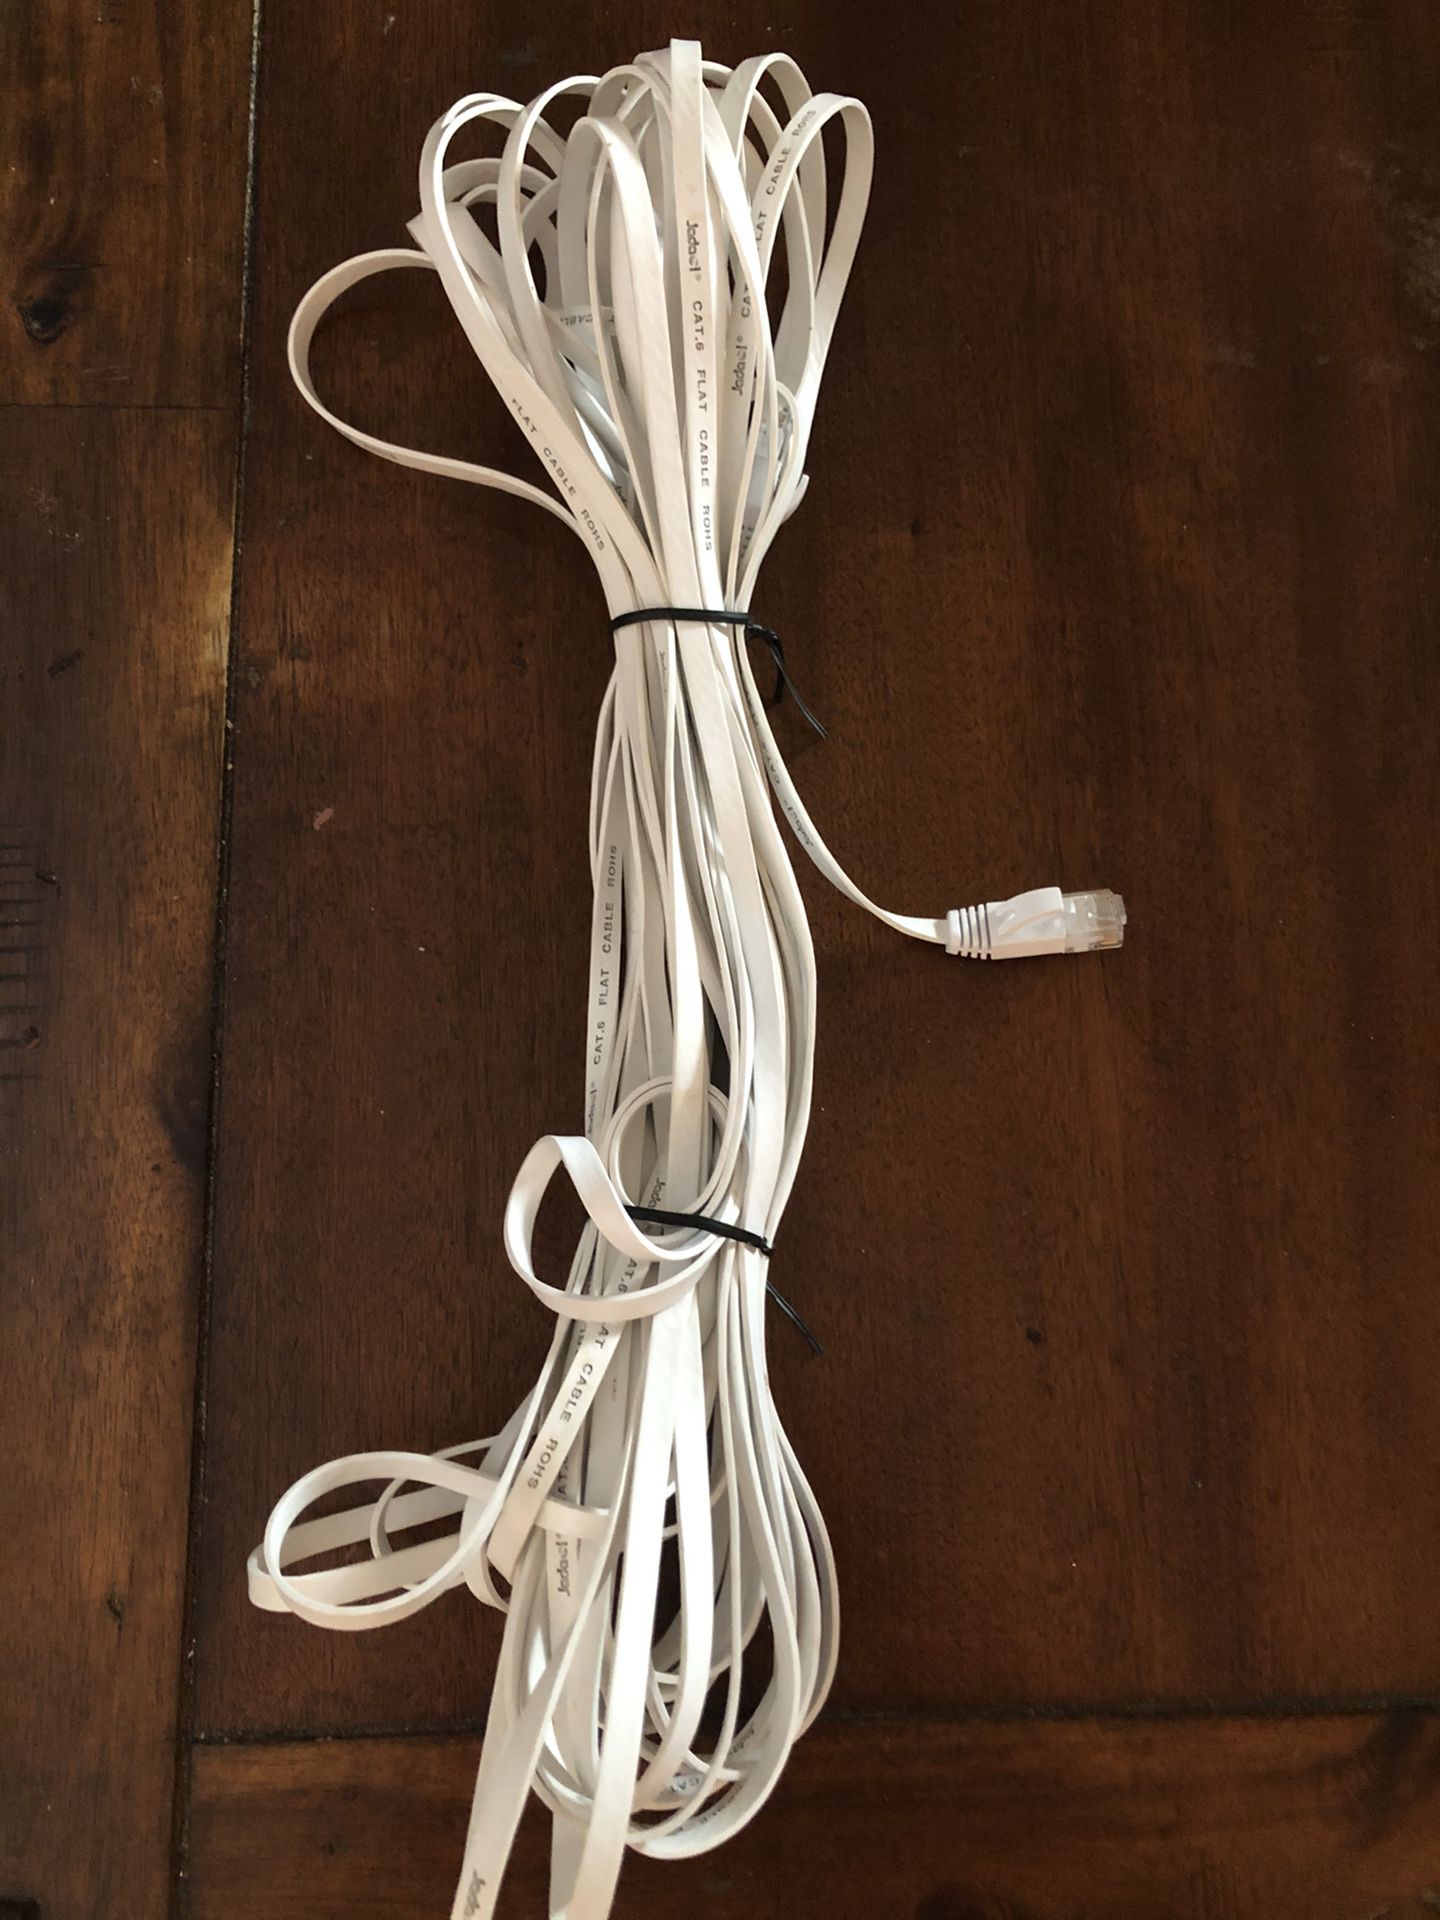 Jadaol 50ft Ethernet Cable